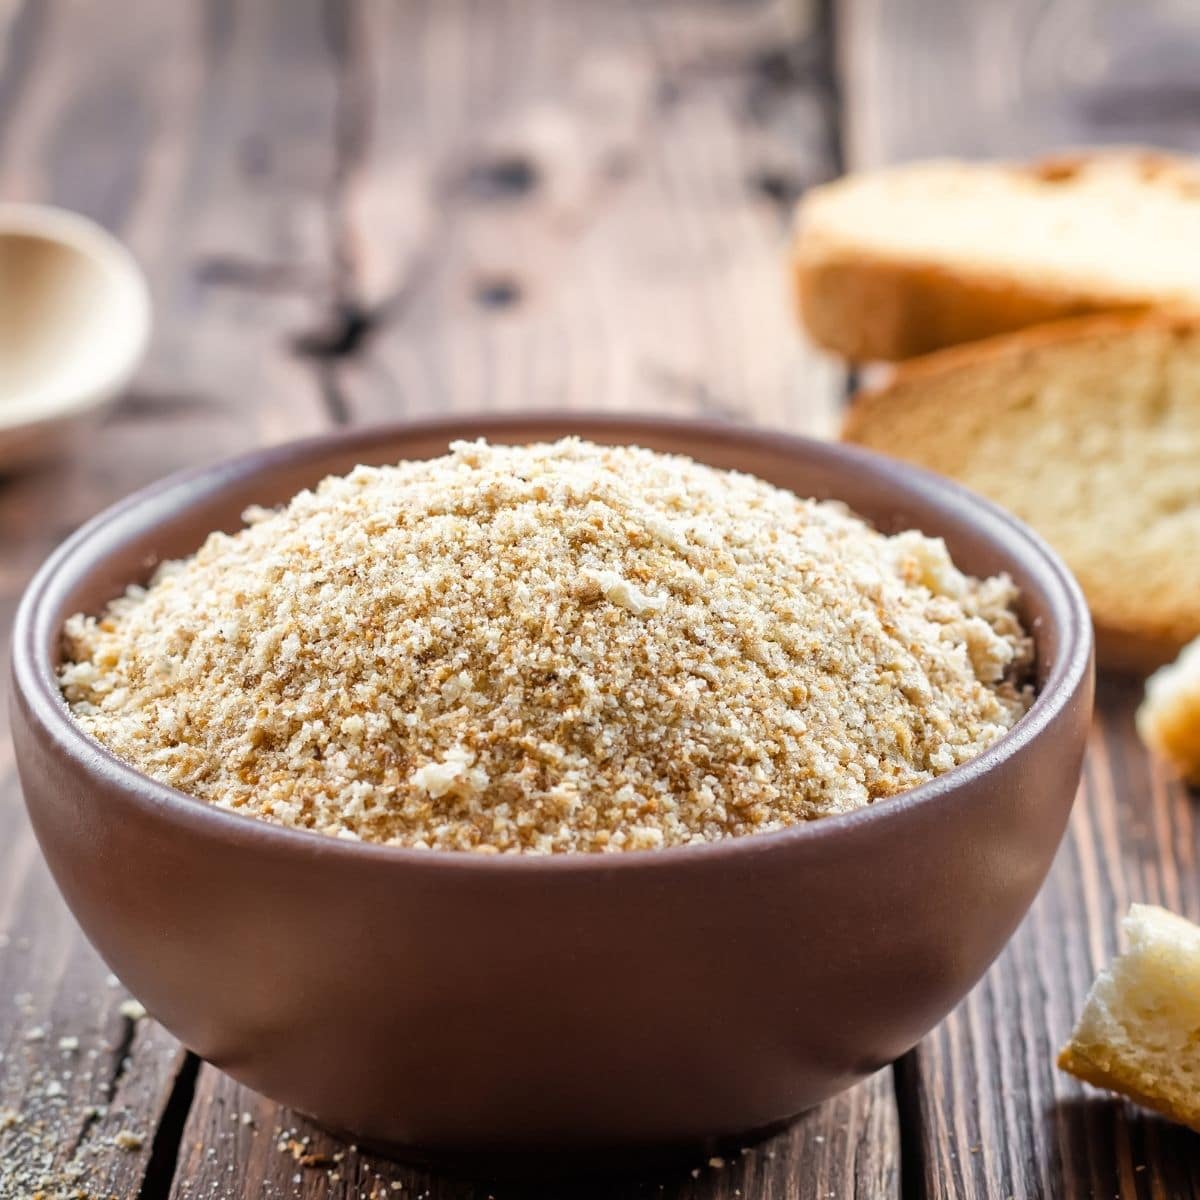 Best breadcrumb substitute options shared for replacing breadcrumbs in any recipe.